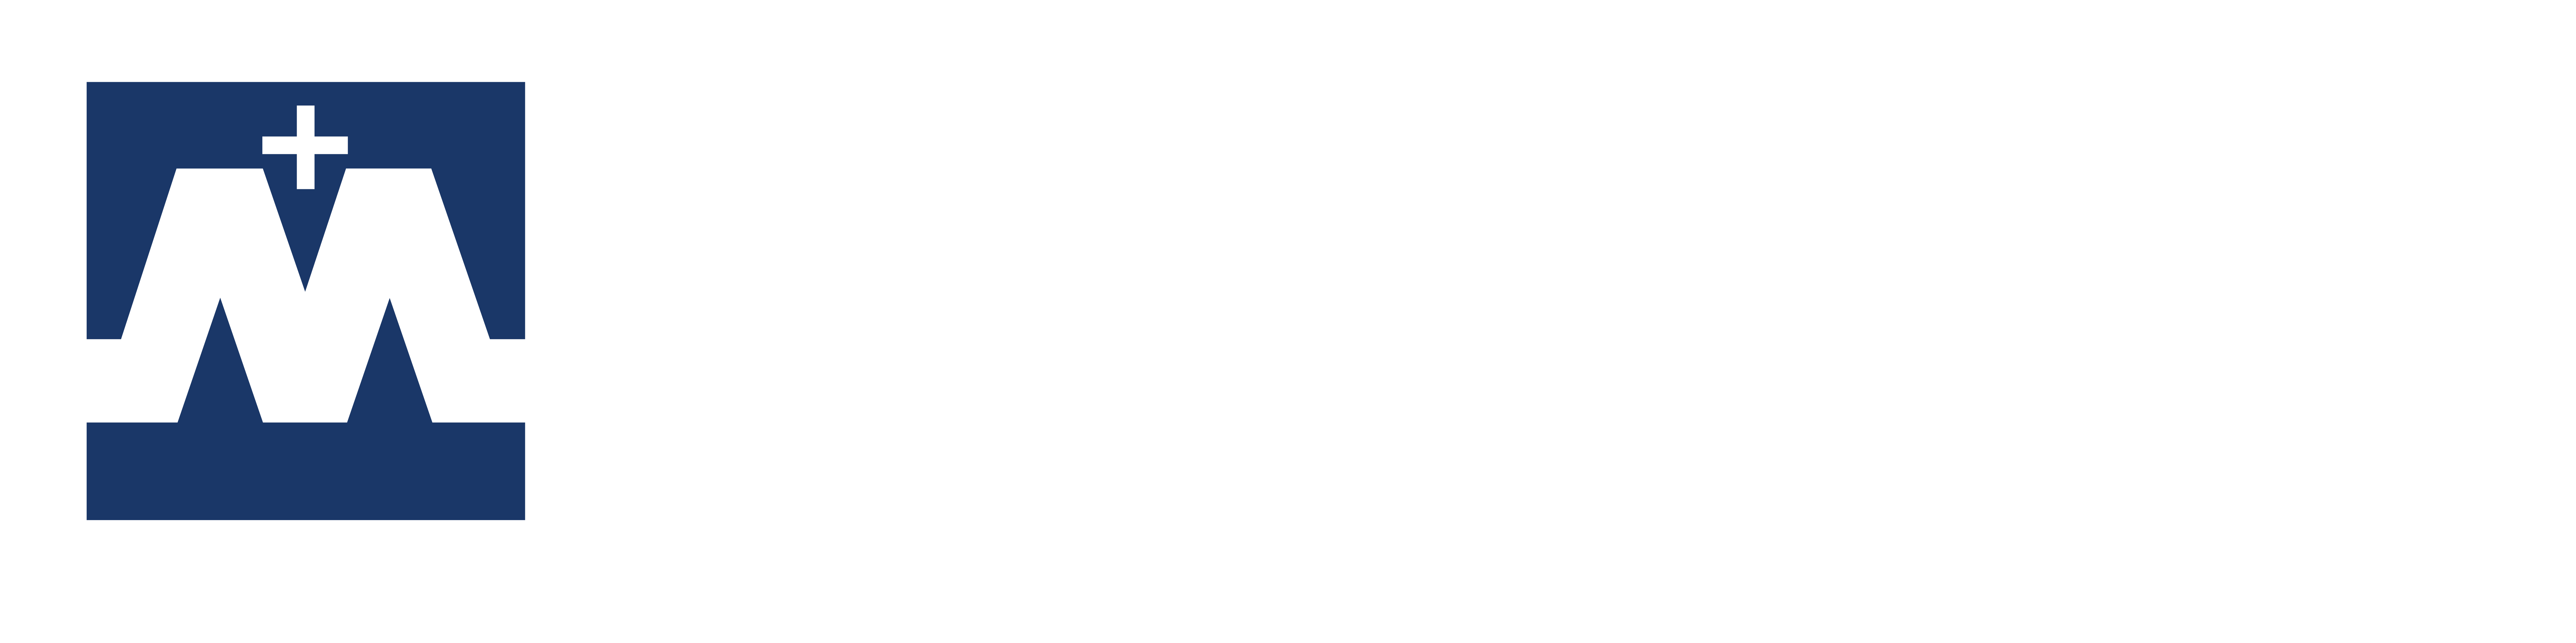 University of Mary Bookstore - Jump to Home page